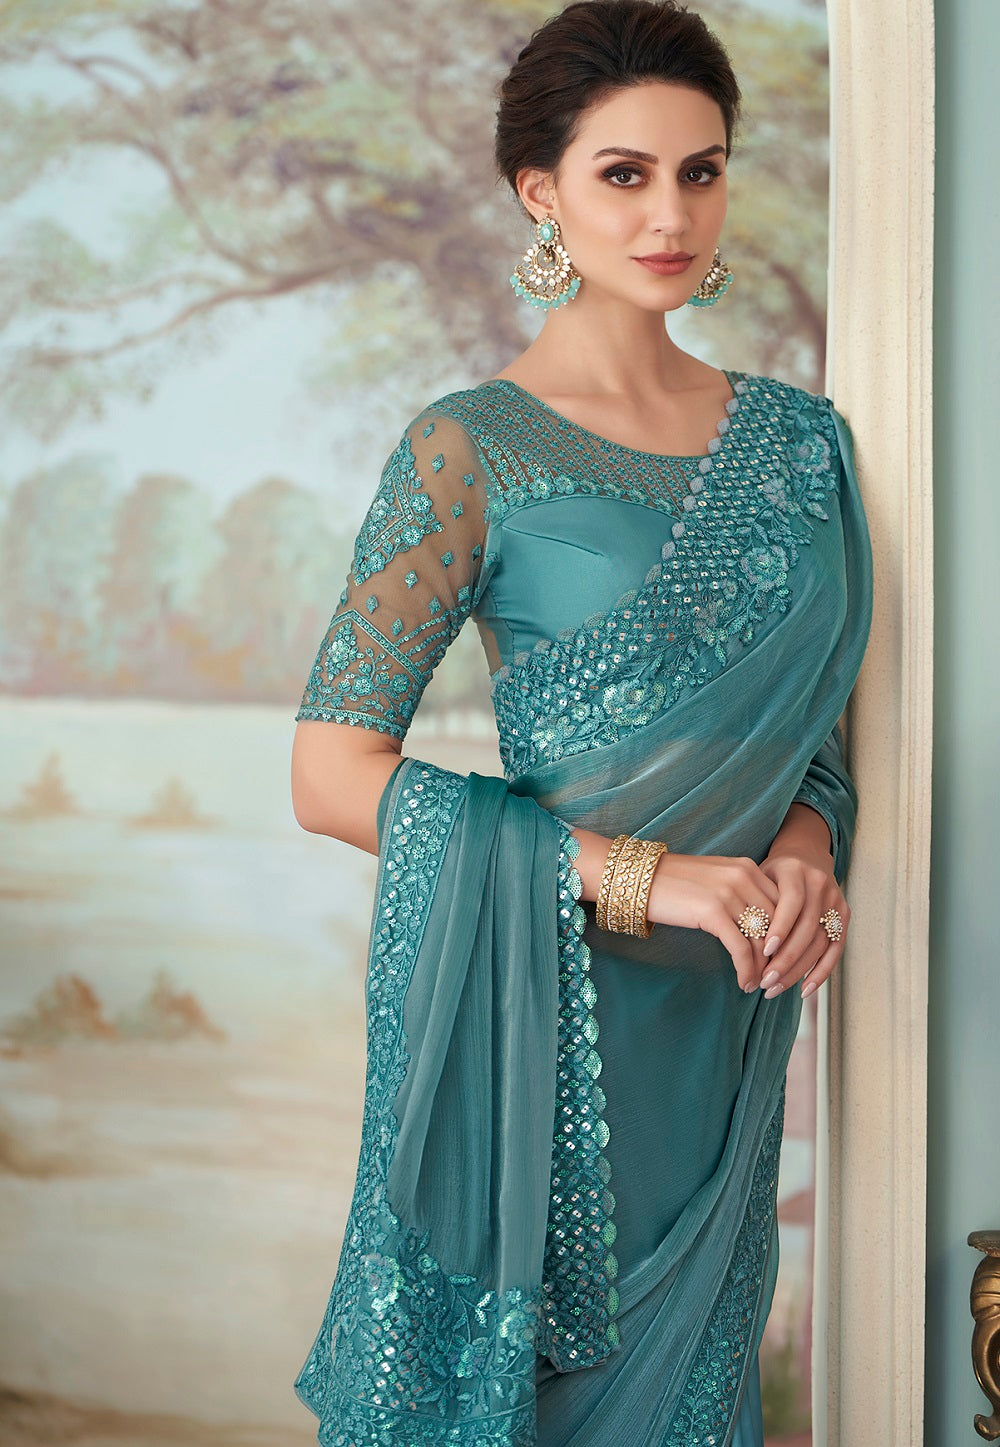 Georgette Silk Embroidered Saree in Teal Blue